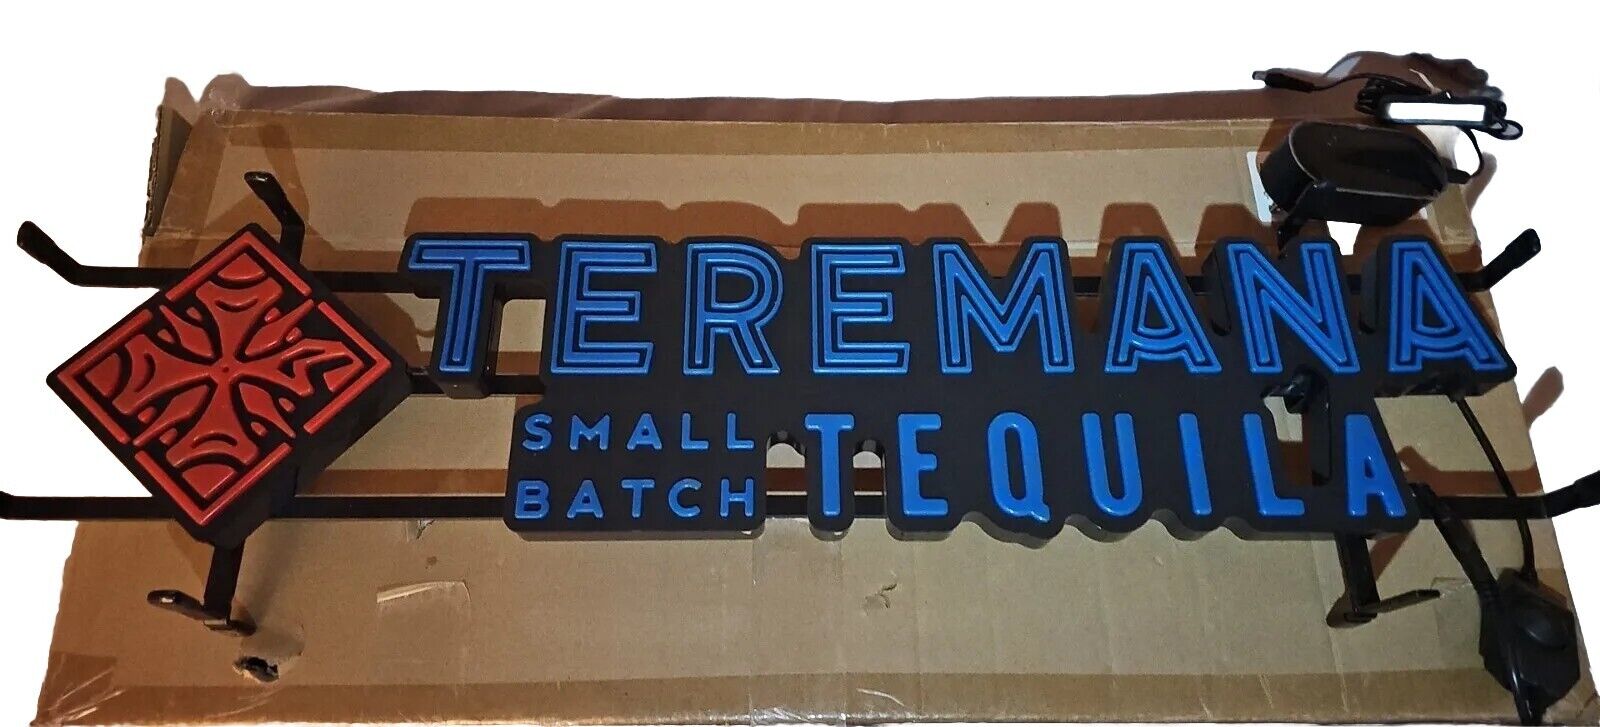 TEREMANA TEQUILA LED SIGN SMALL BATCH TEQUILA LIGHT SIGN MAN CAVE GARAGE New 